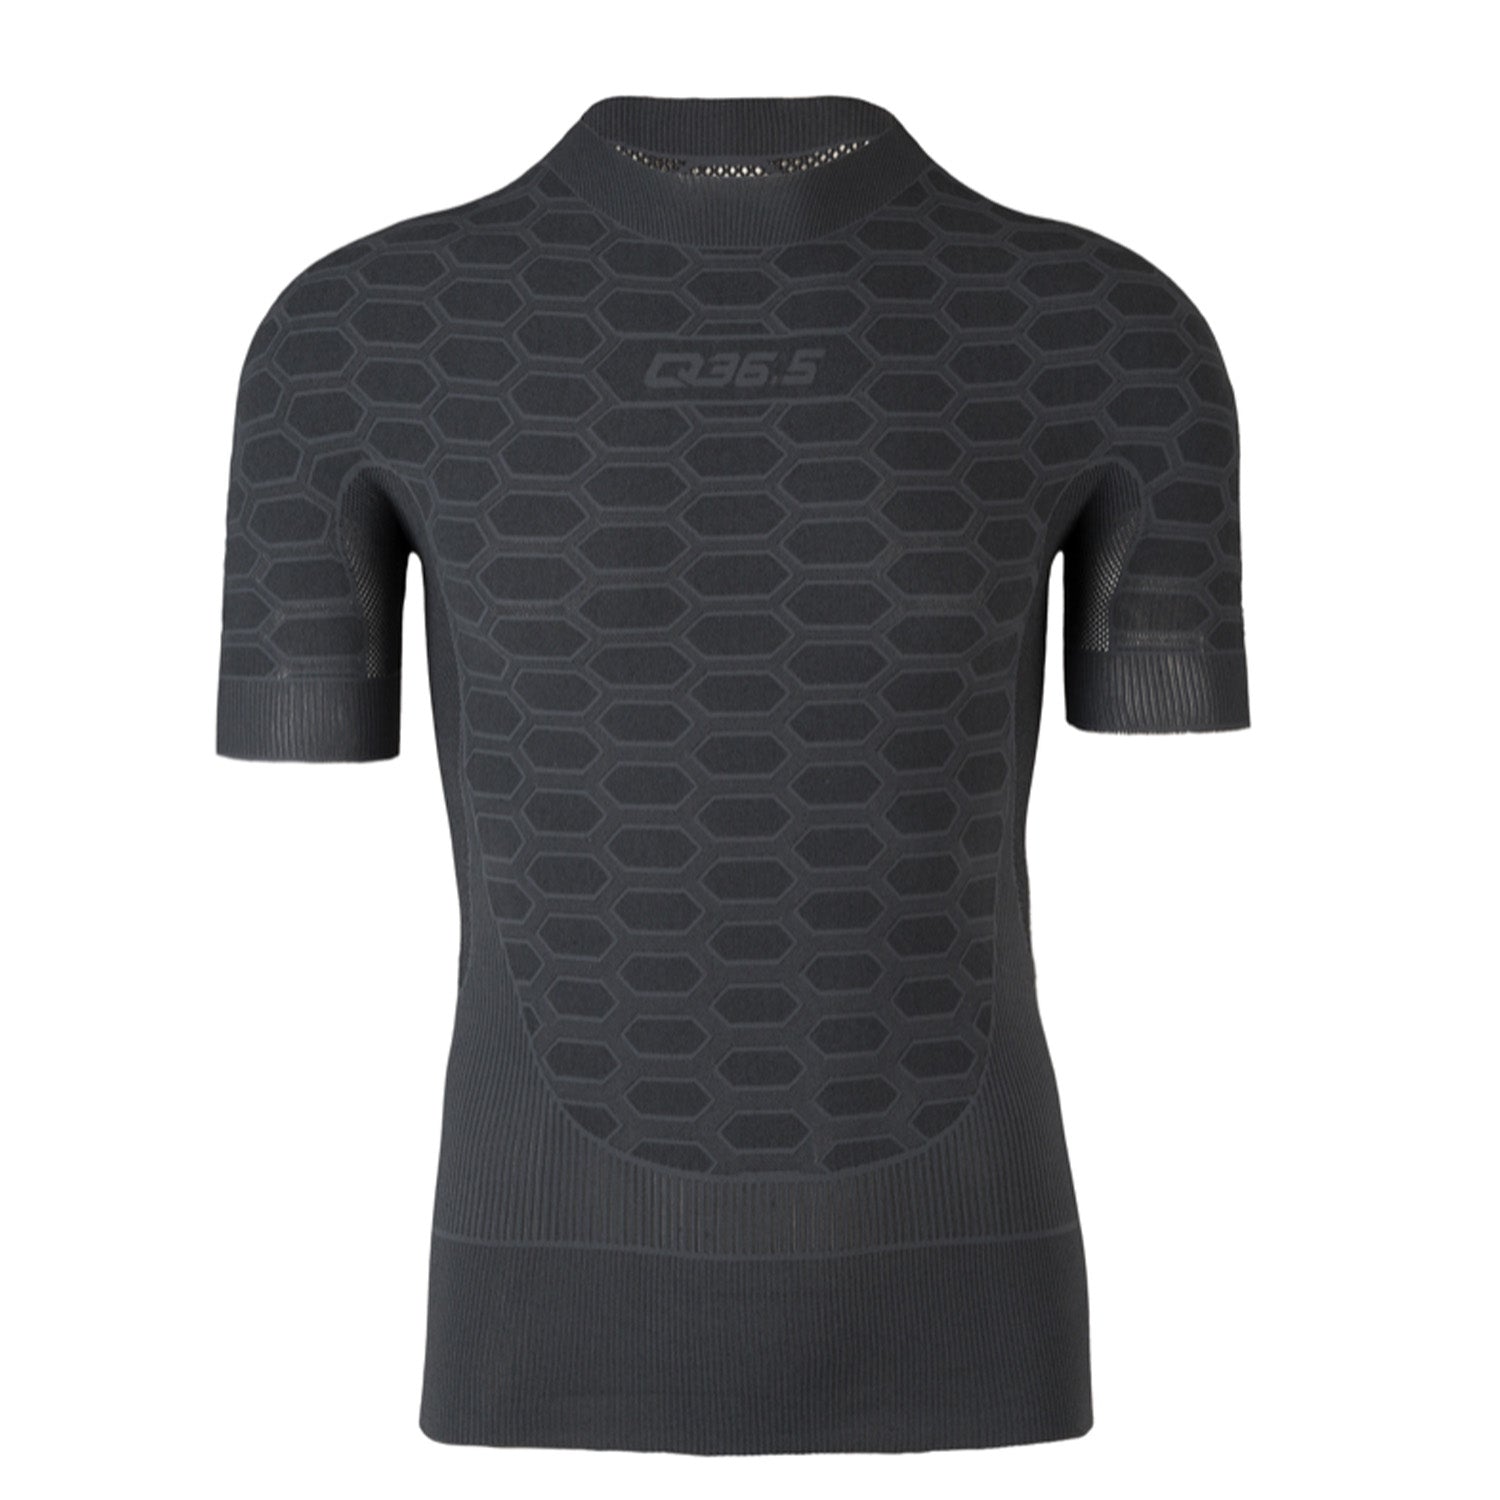 Q36.5  Base Layer 2 Short Sleeve in Anthracite